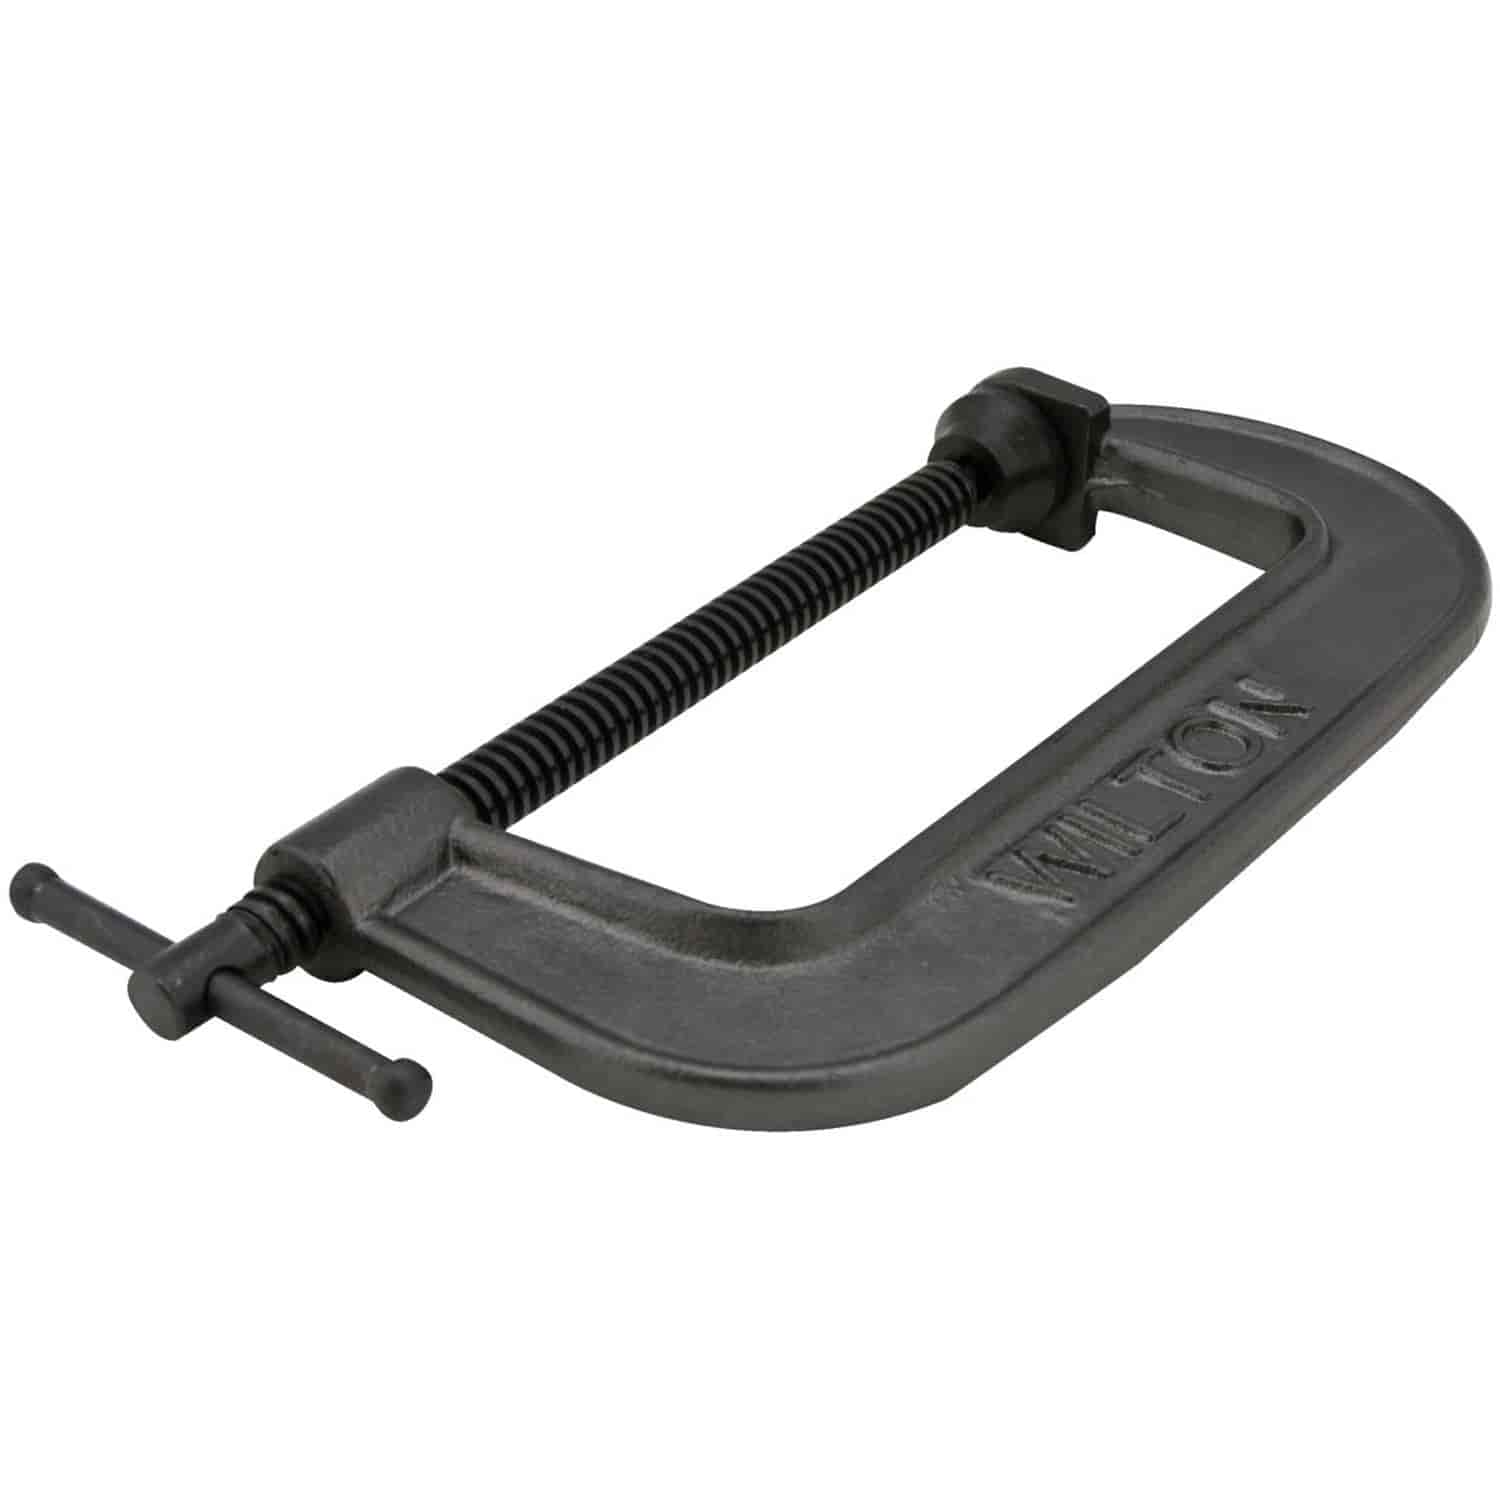 540A Series C-Clamp Opening Capacity Max: 4"